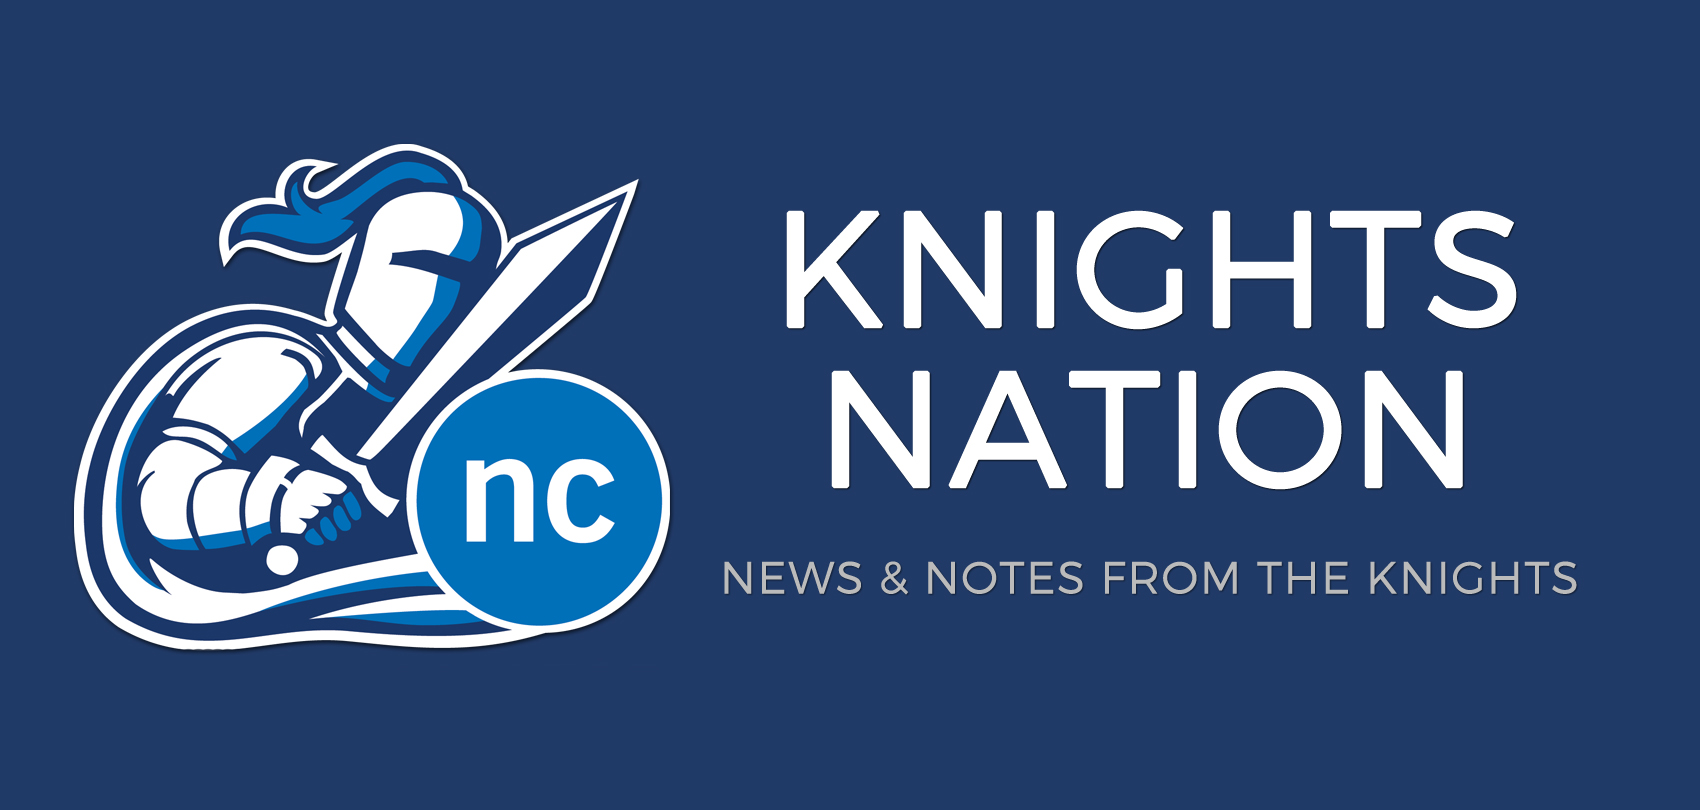 Knights Nation is in your inbox